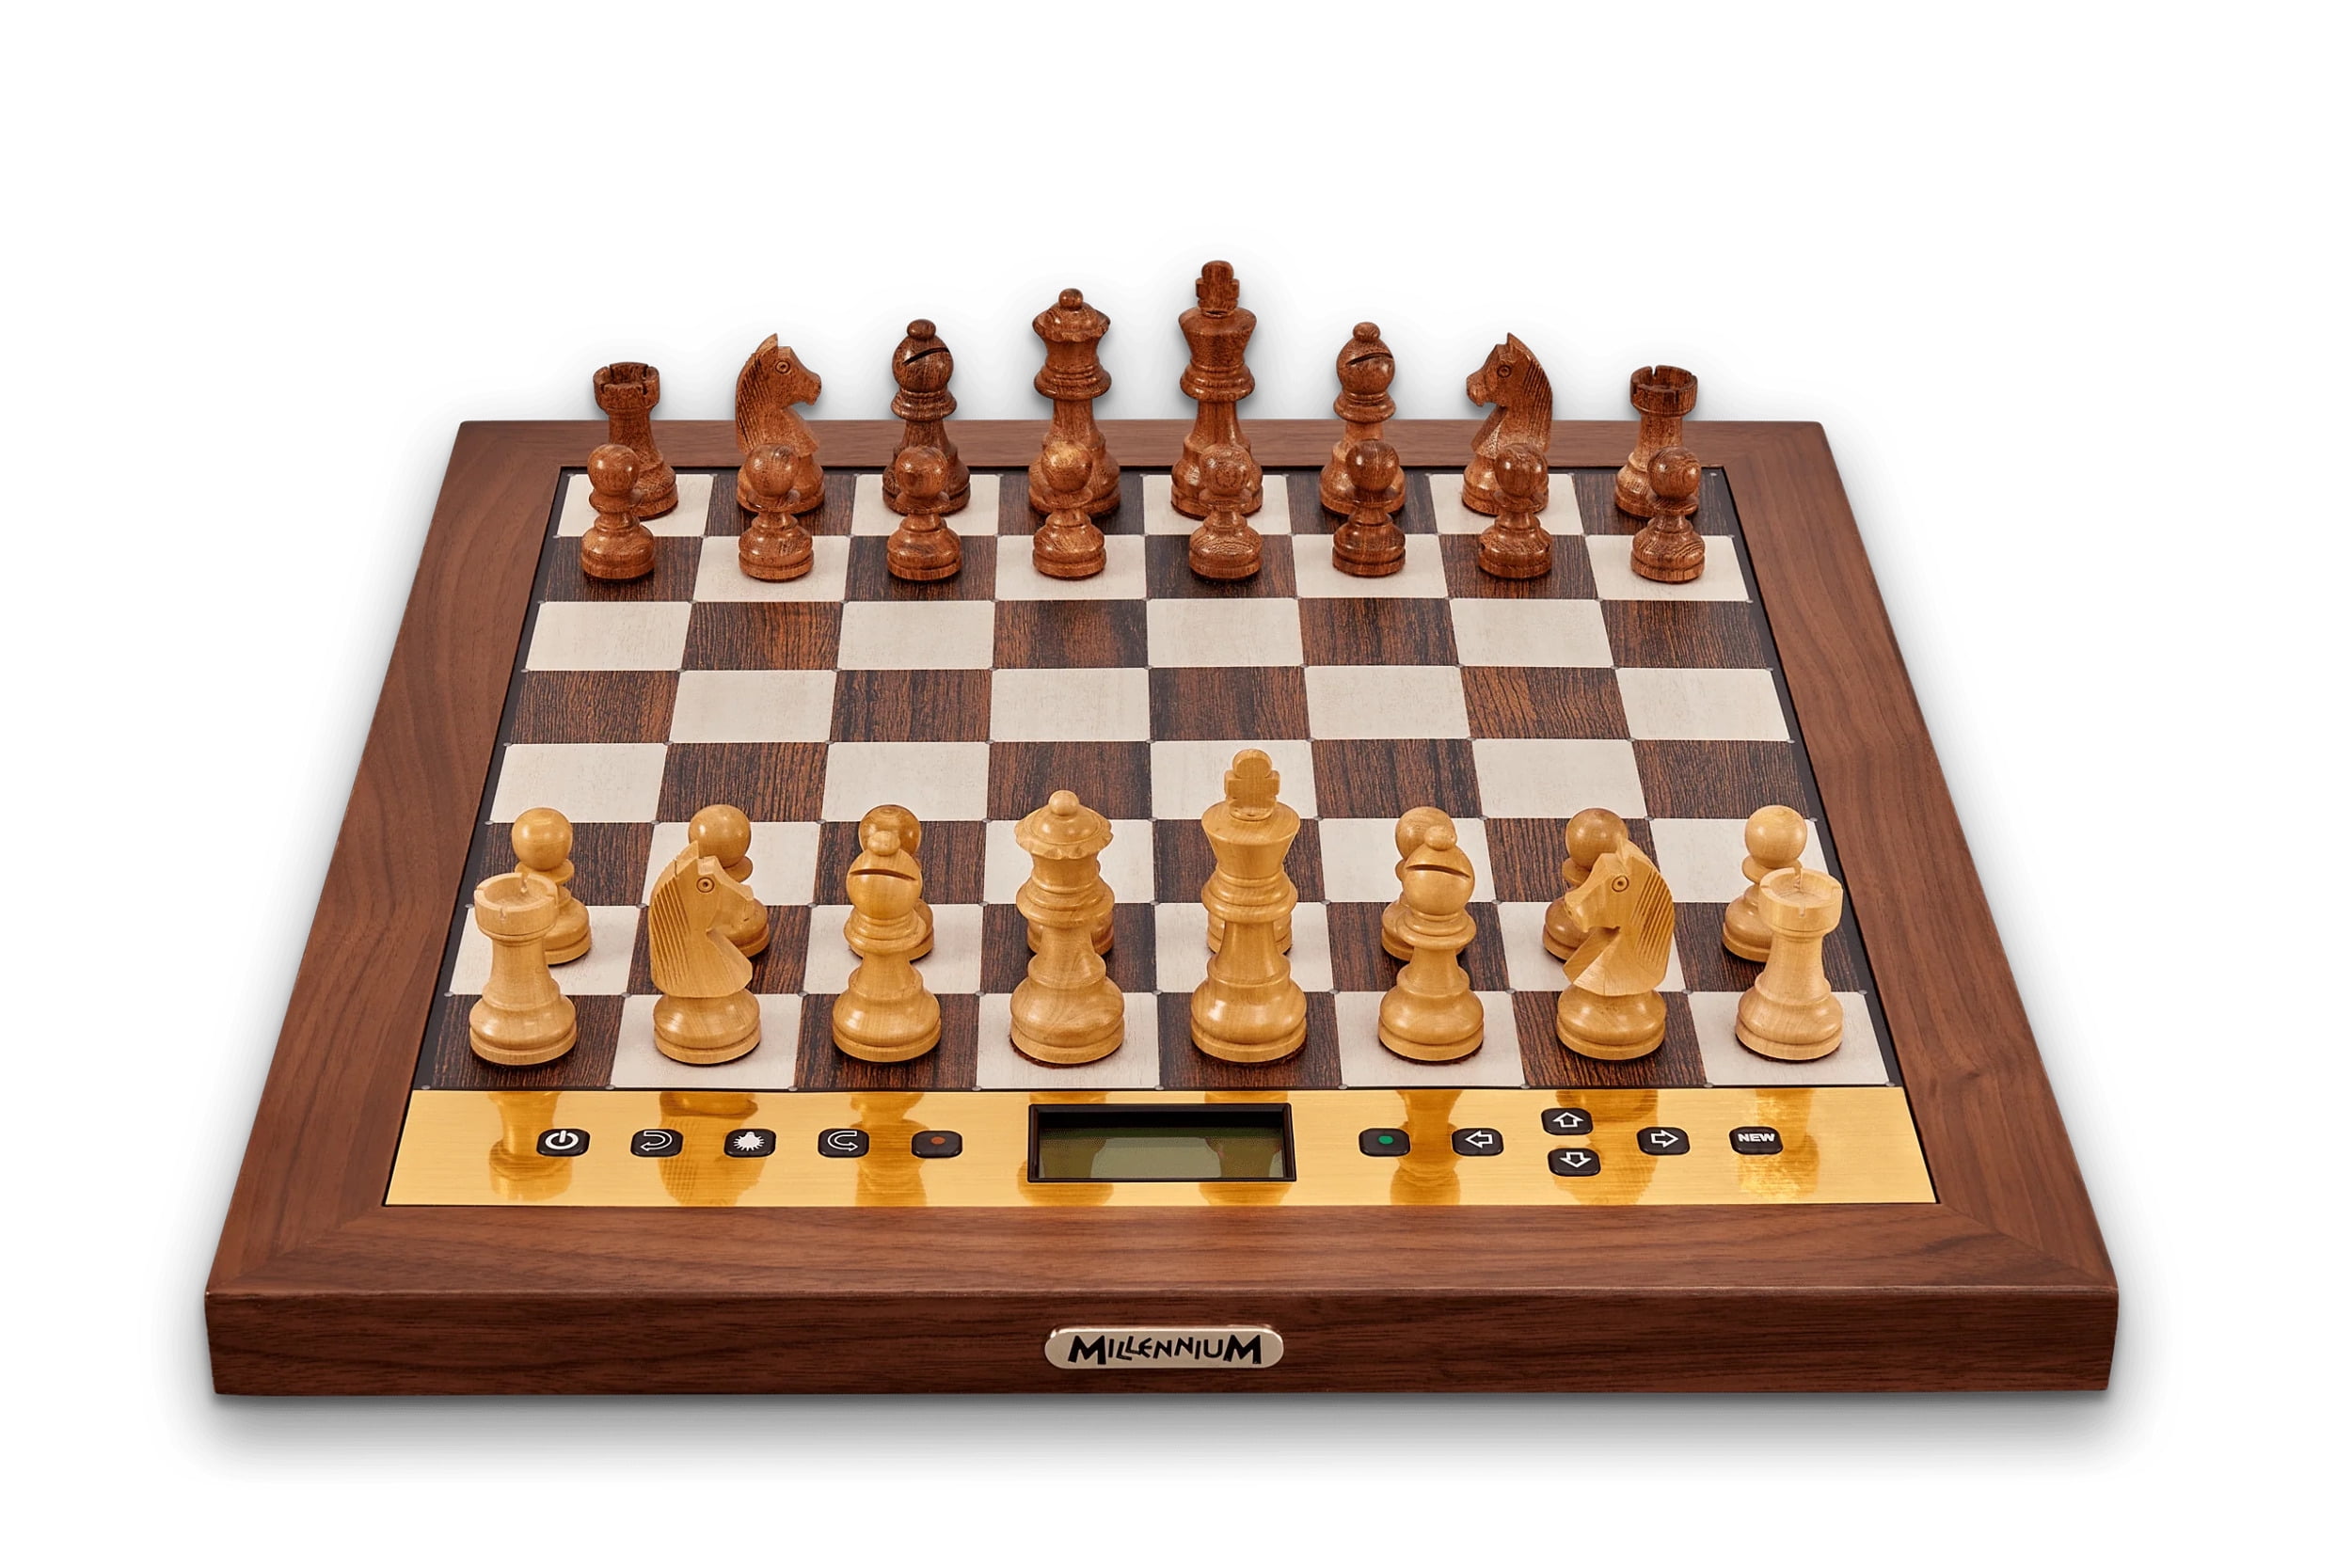 Chesslinks Worldwide – All about Chess and Games